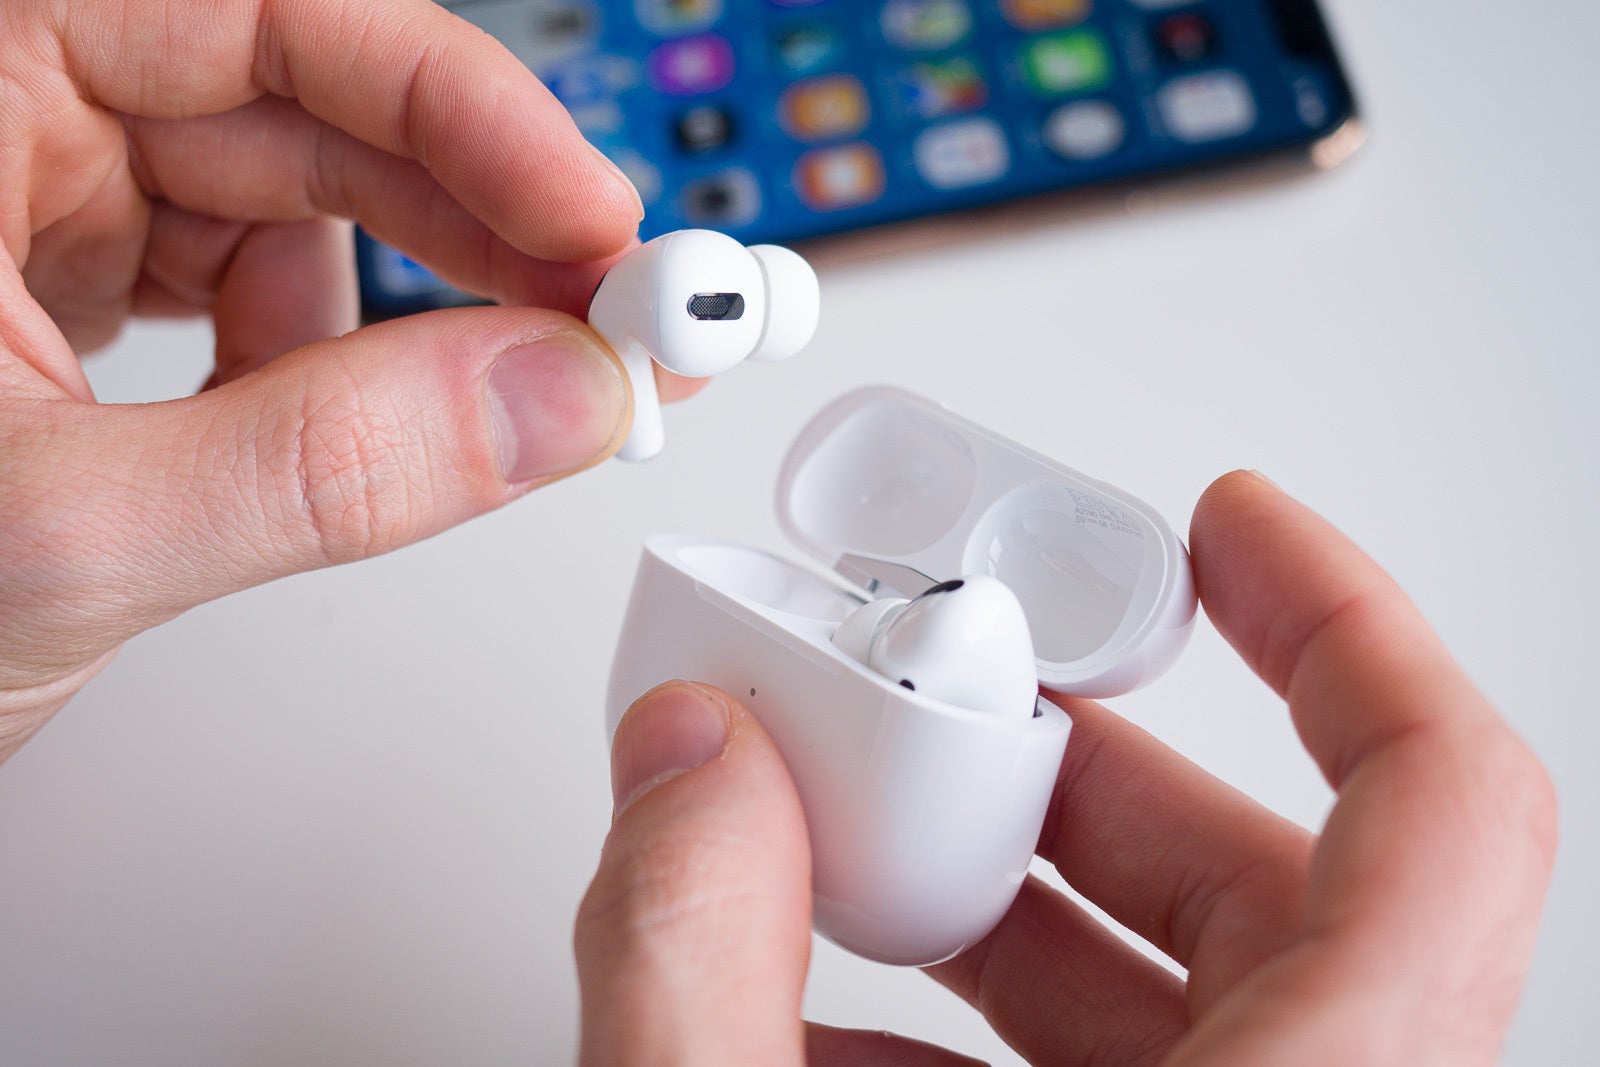 Make sure your AirPods are inside with the case charging - How to update your AirPods to the latest firmware